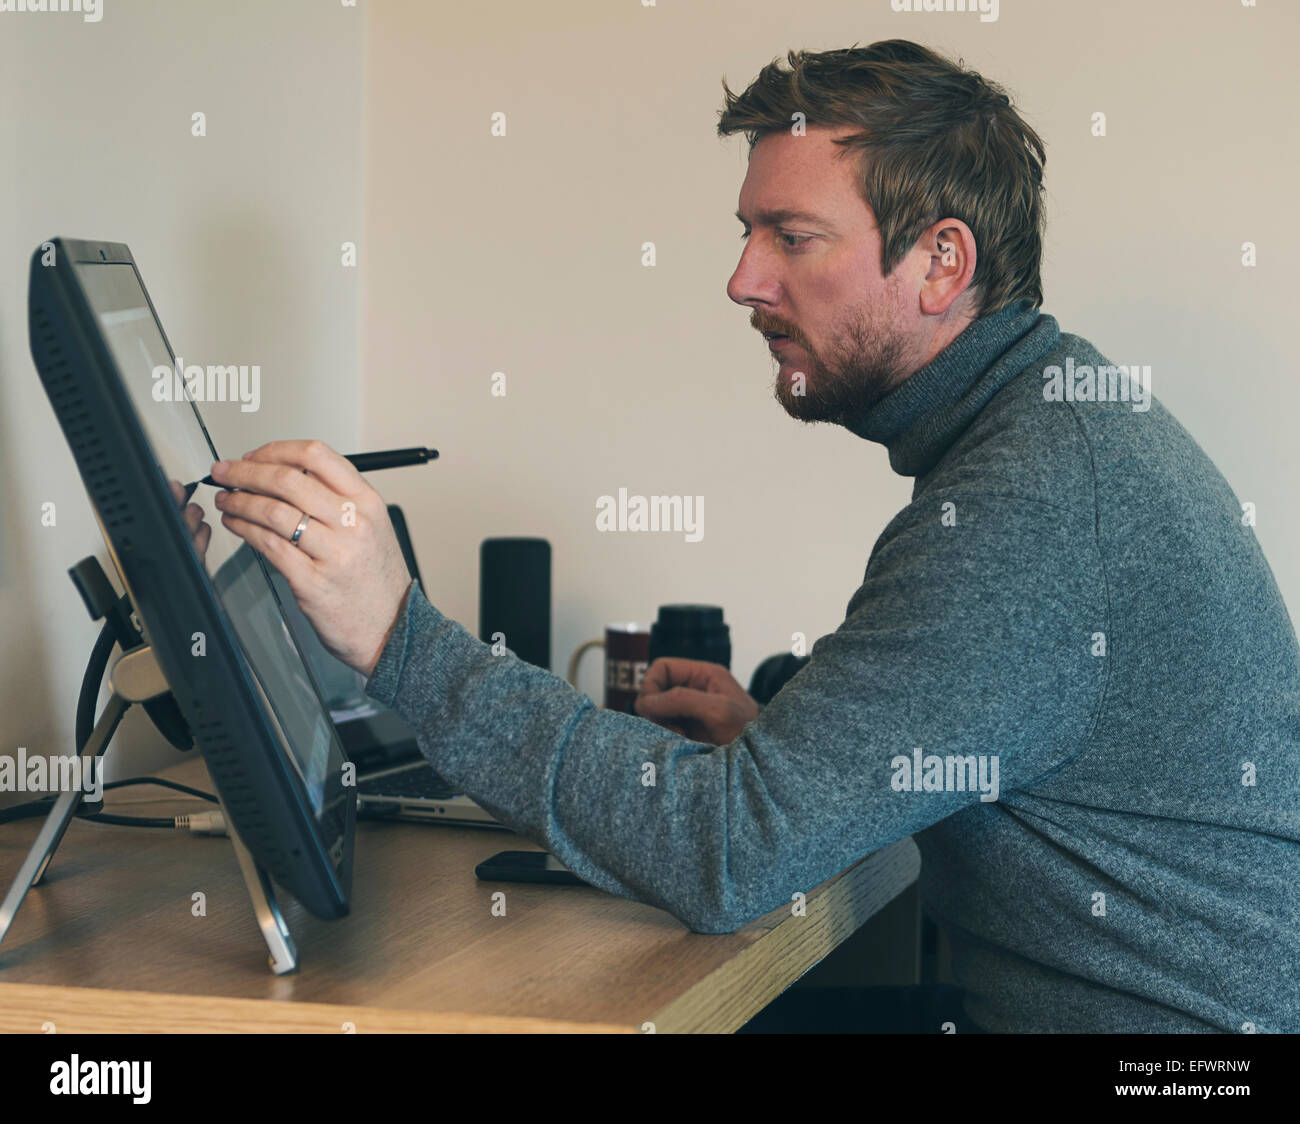 30s Male Working on Touch Screen Stock Photo